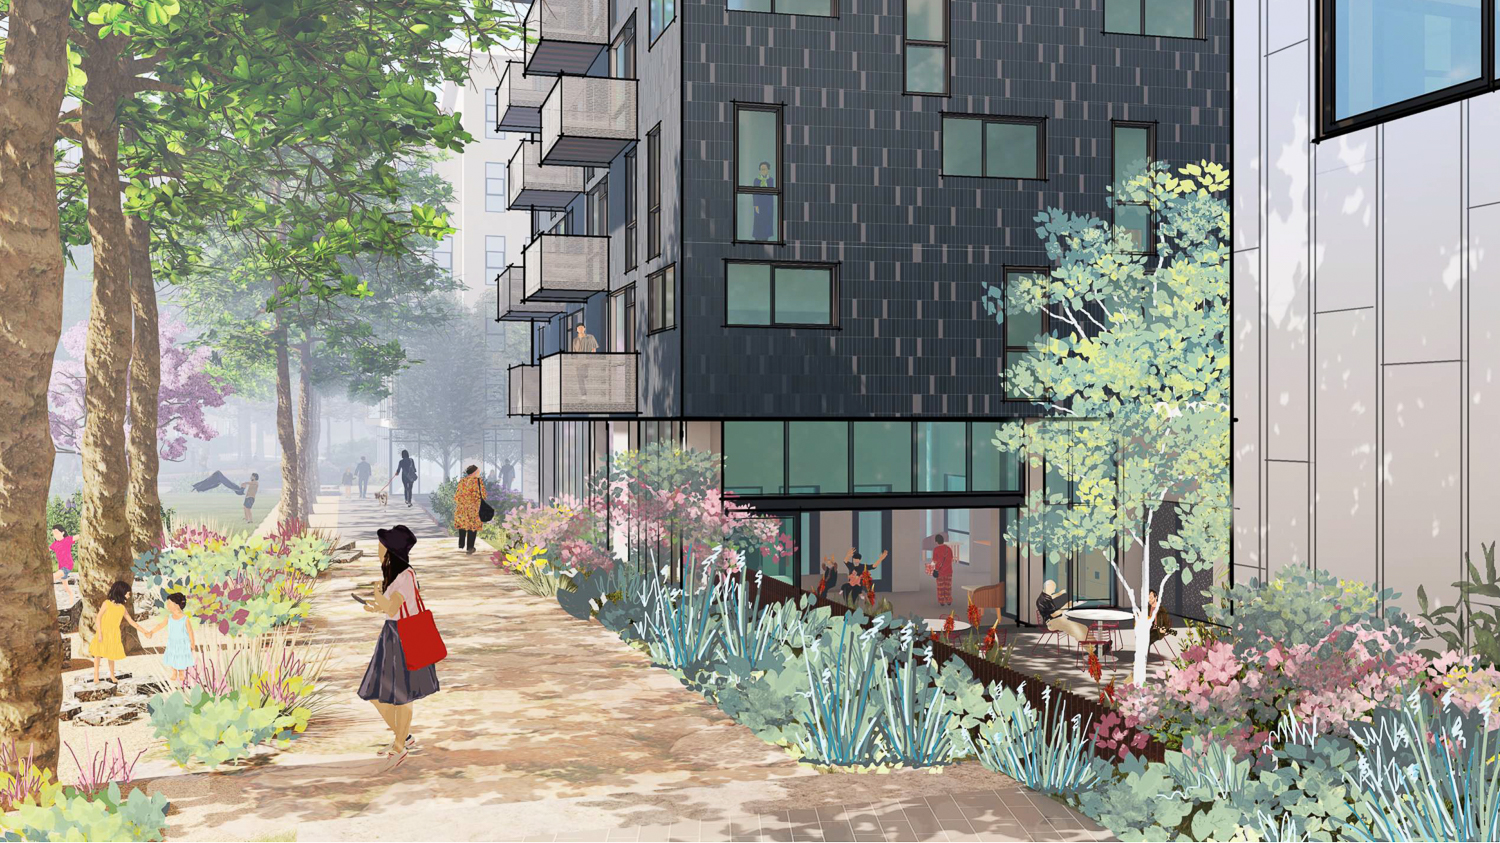 Balboa Reservoir Block F view at South Sunken Courtyard, rendering by David Baker Architects